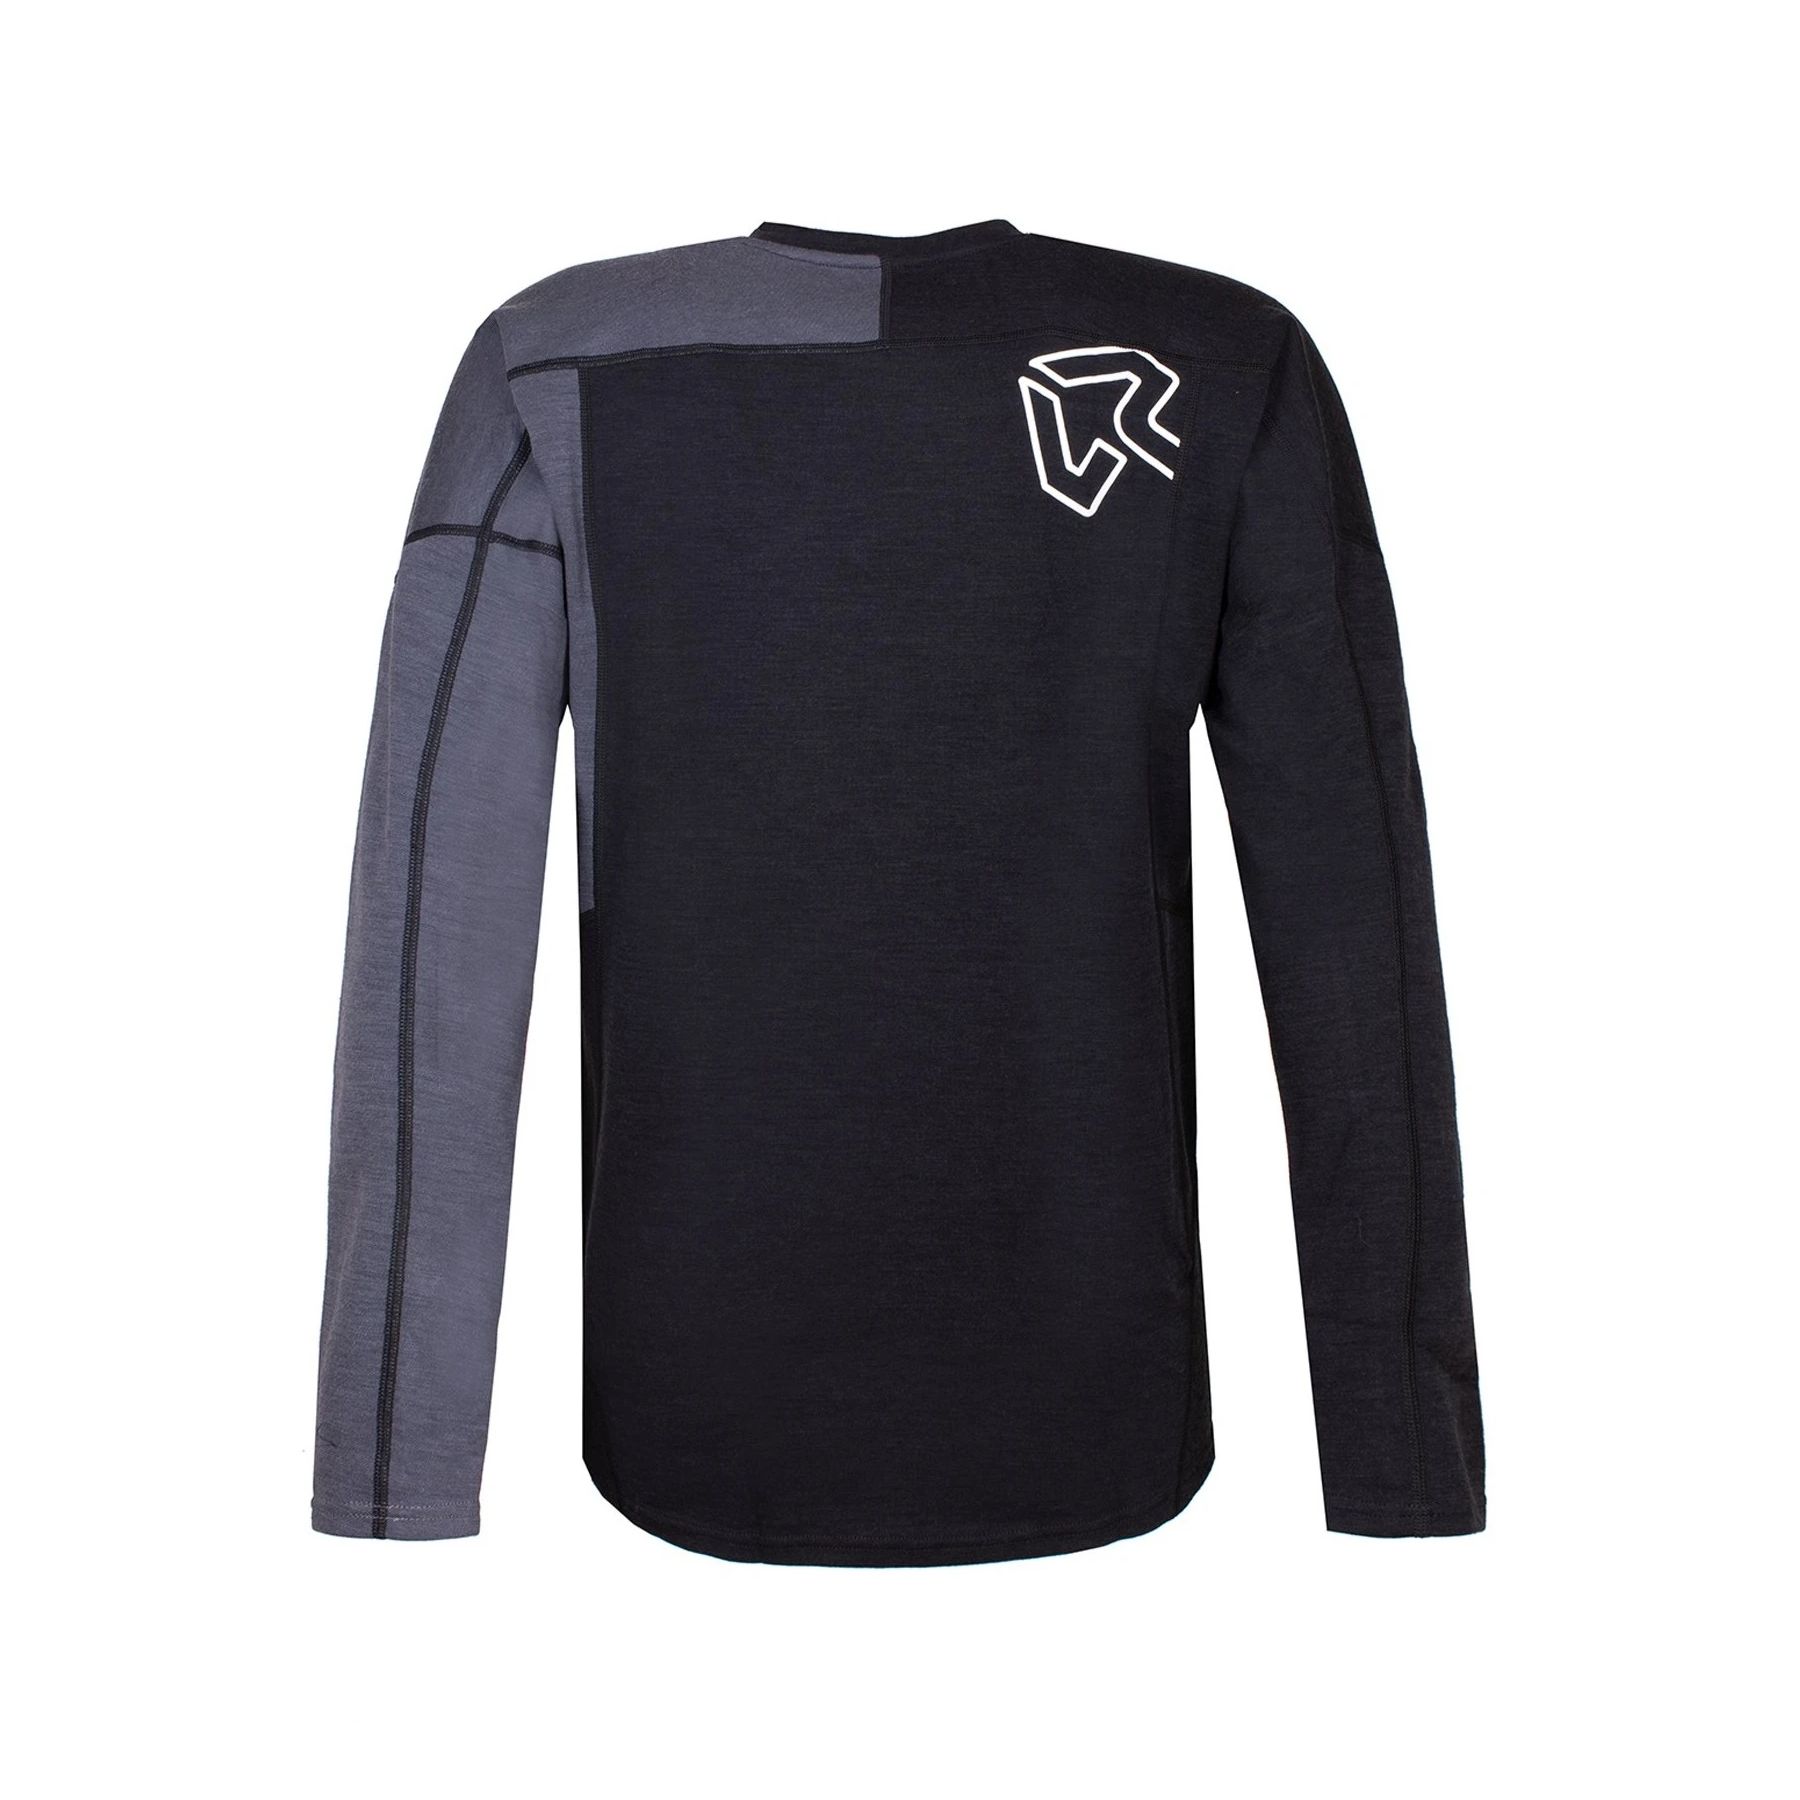 2nd Layer -  rock experience Moonstone LS T-shrit Thermal Underwear